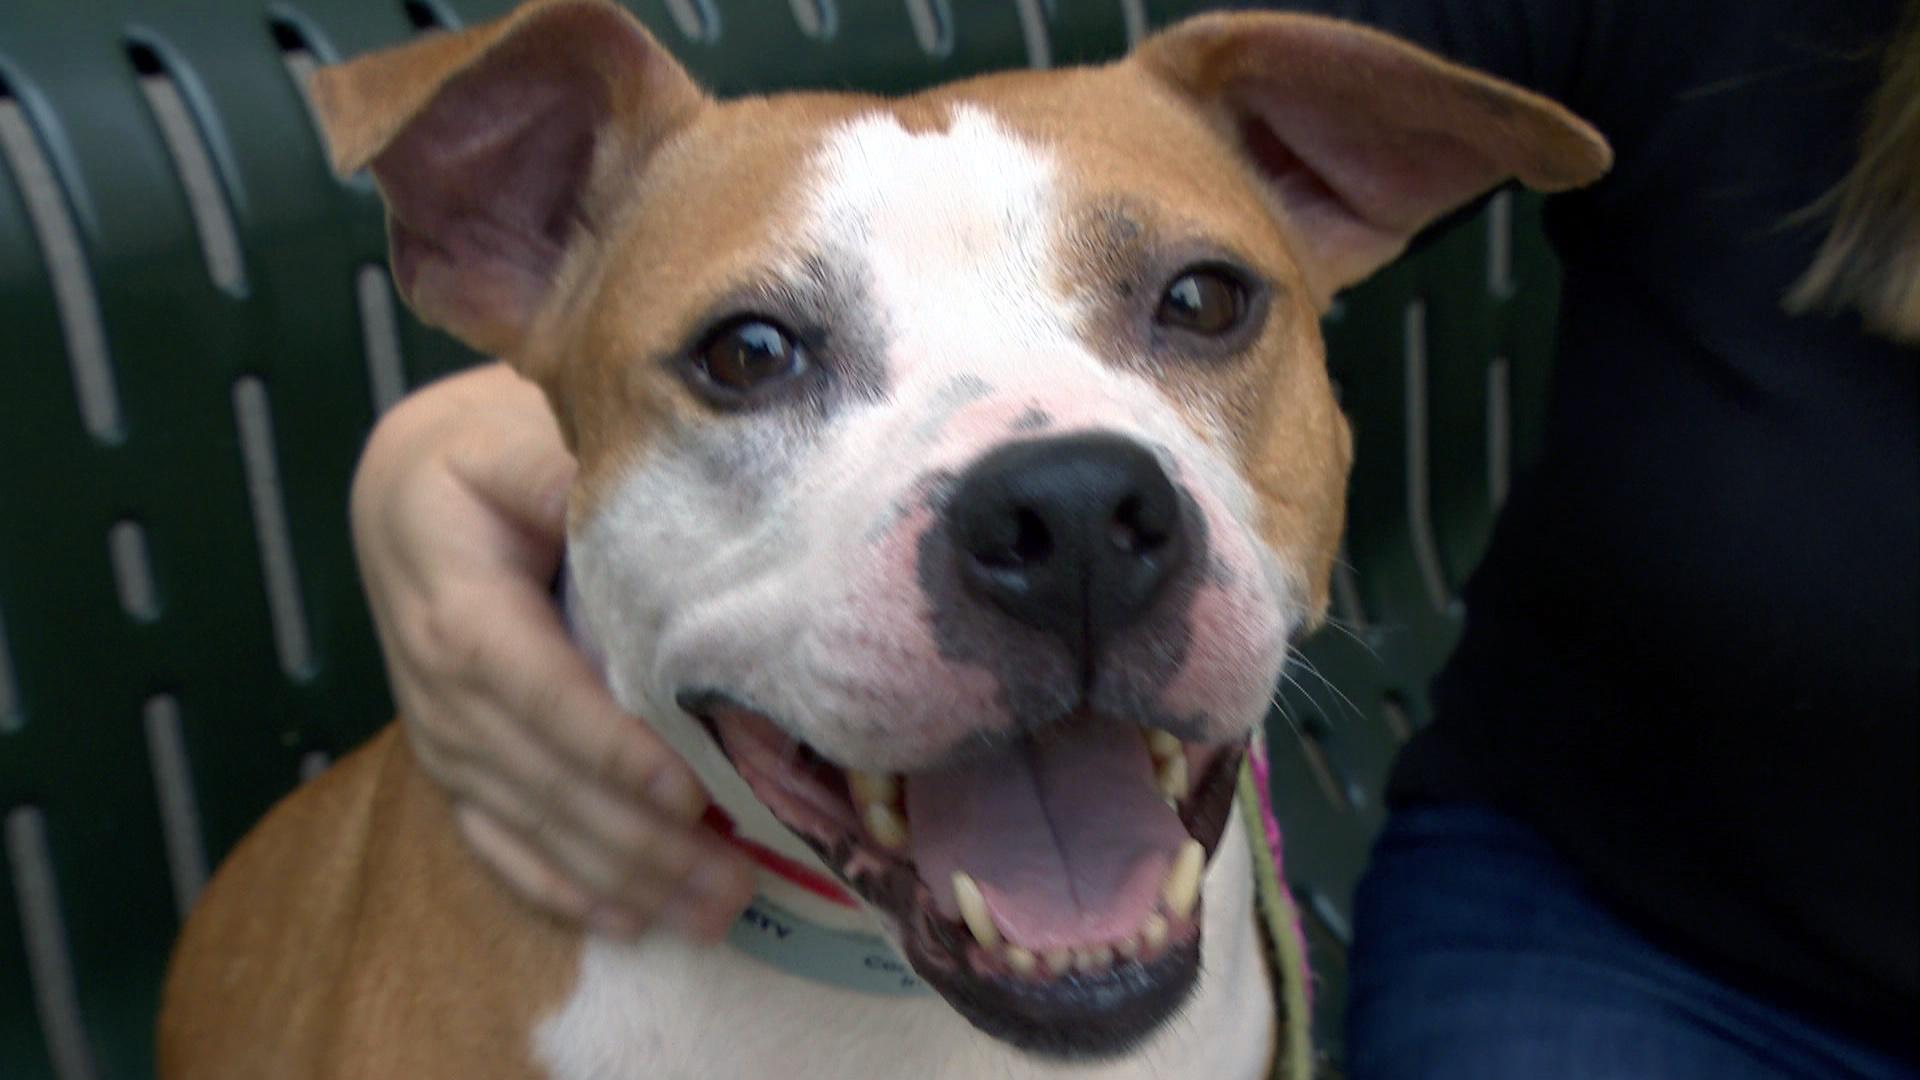 A dog in the care of The Anti-Cruelty Society. (WTTW News)